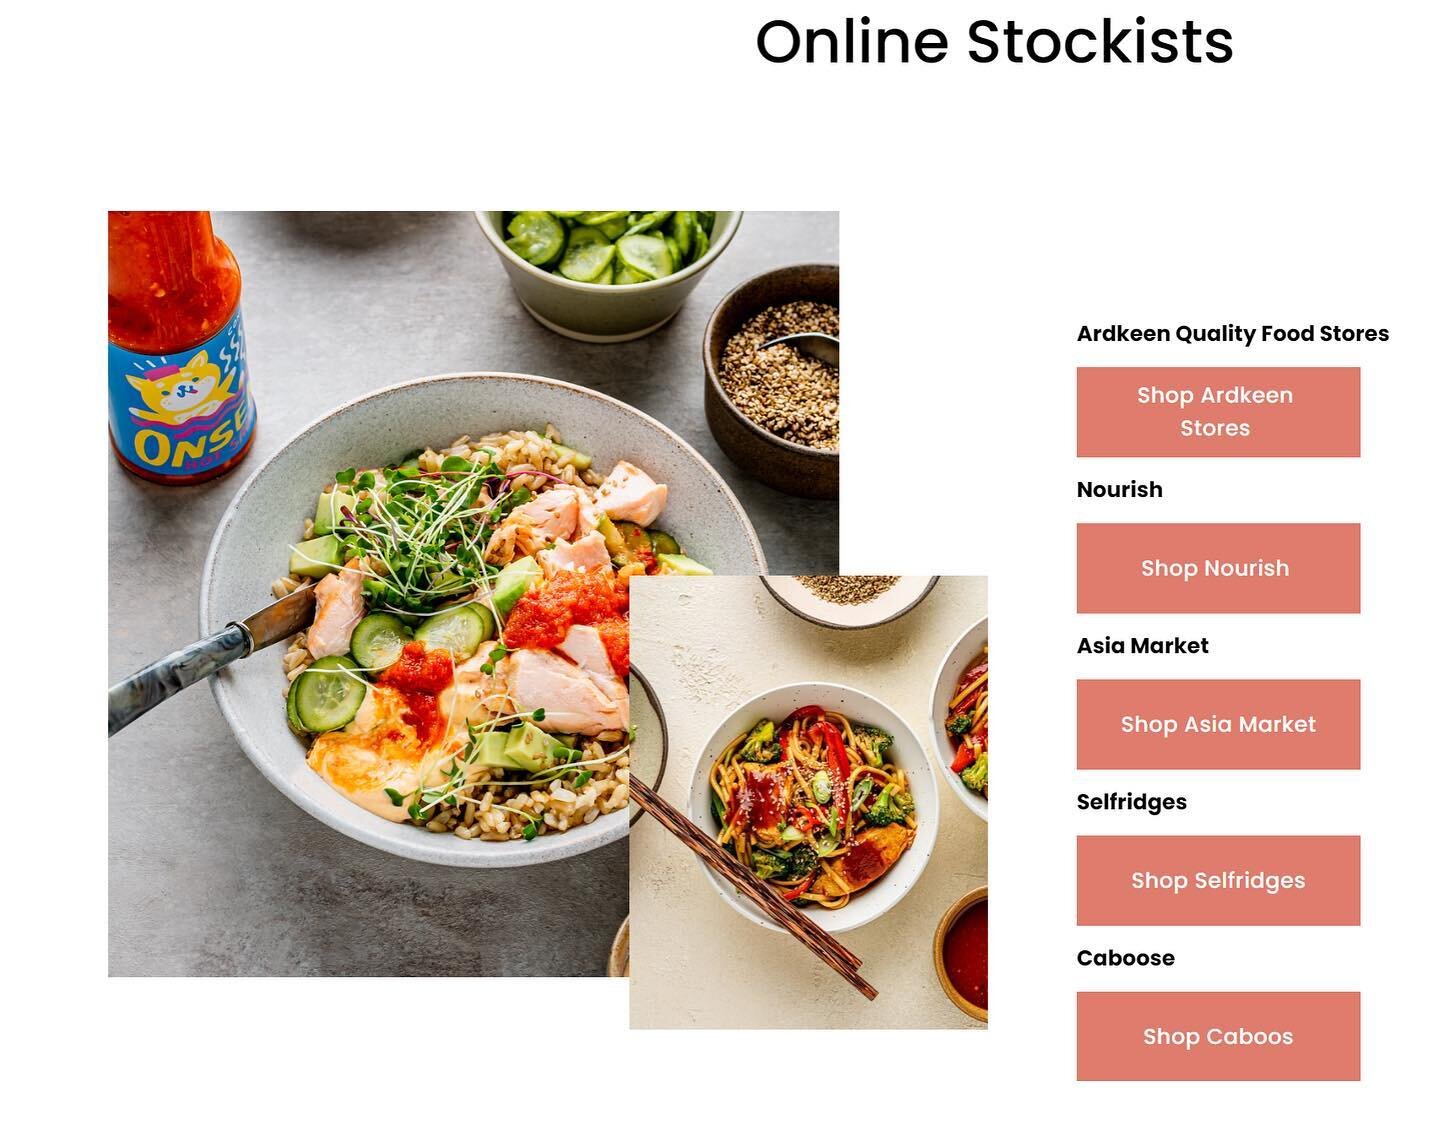 Looking to shop for Conbini online? We have a list of stockists on our website! (Complete with links)

Joining the roster we have @mycaboosestore. They stock a huge selection of Irish artisan products that are well worth having a look through.

As al